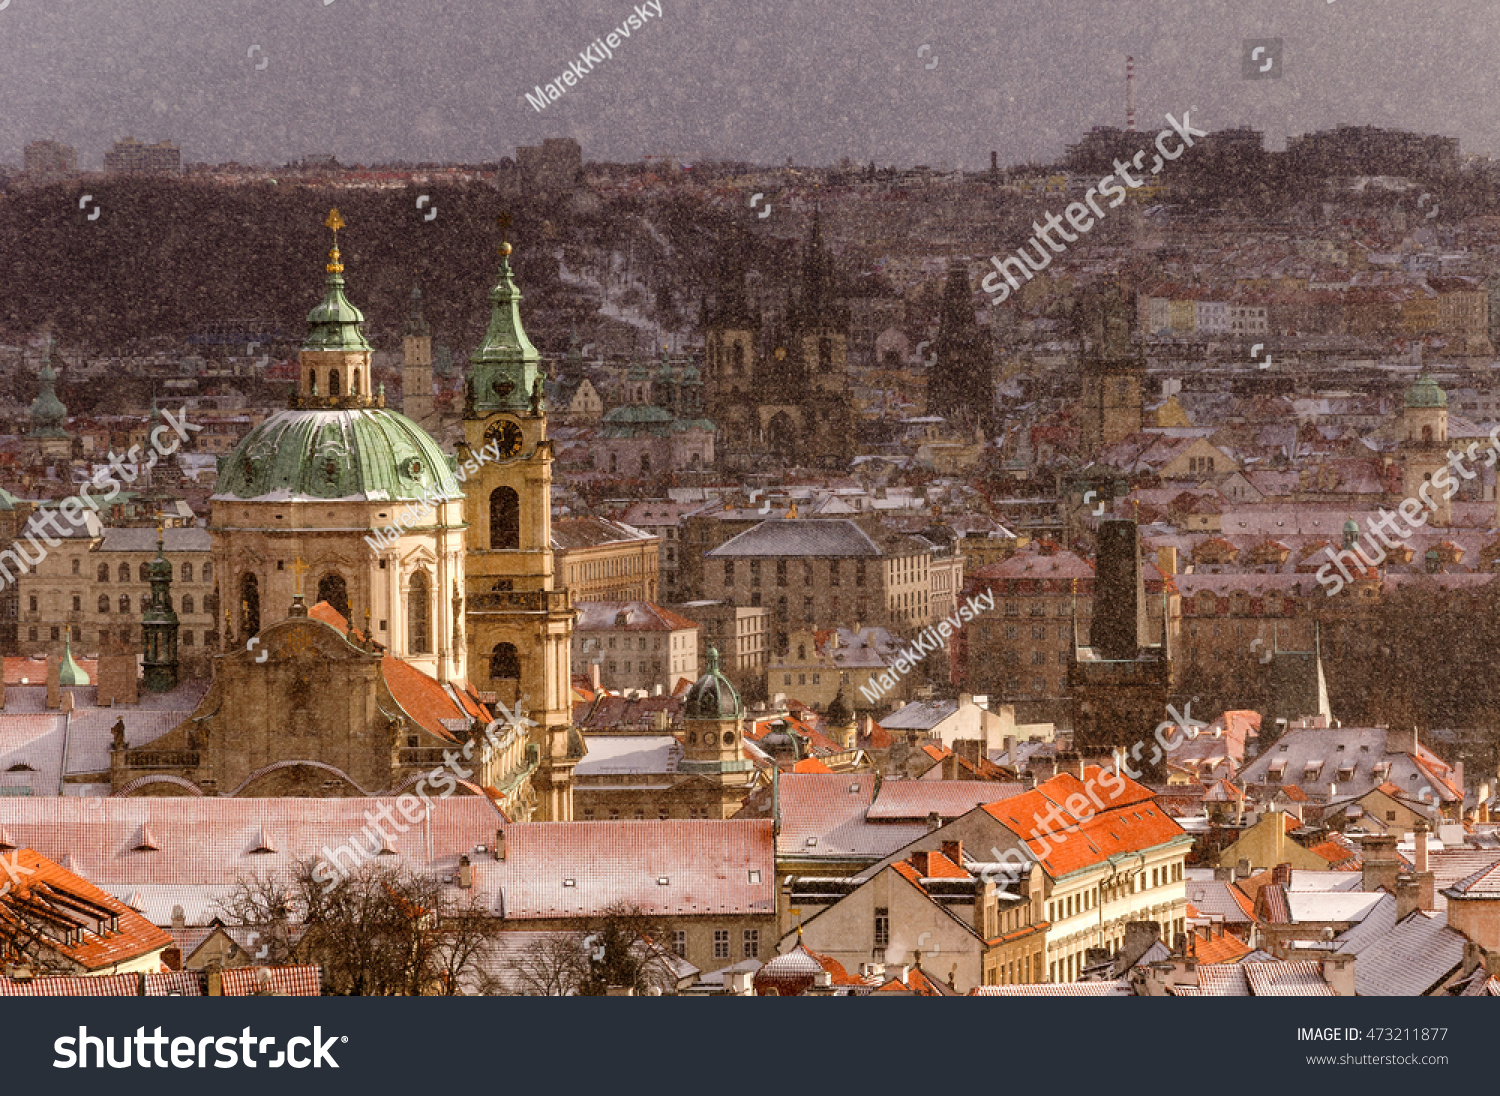 Amazing Gothic church of Our Lady and St. Nicolas church during winter day with heavy snow storm and sun rays peeping through clouds, Prague, Czech republic #473211877